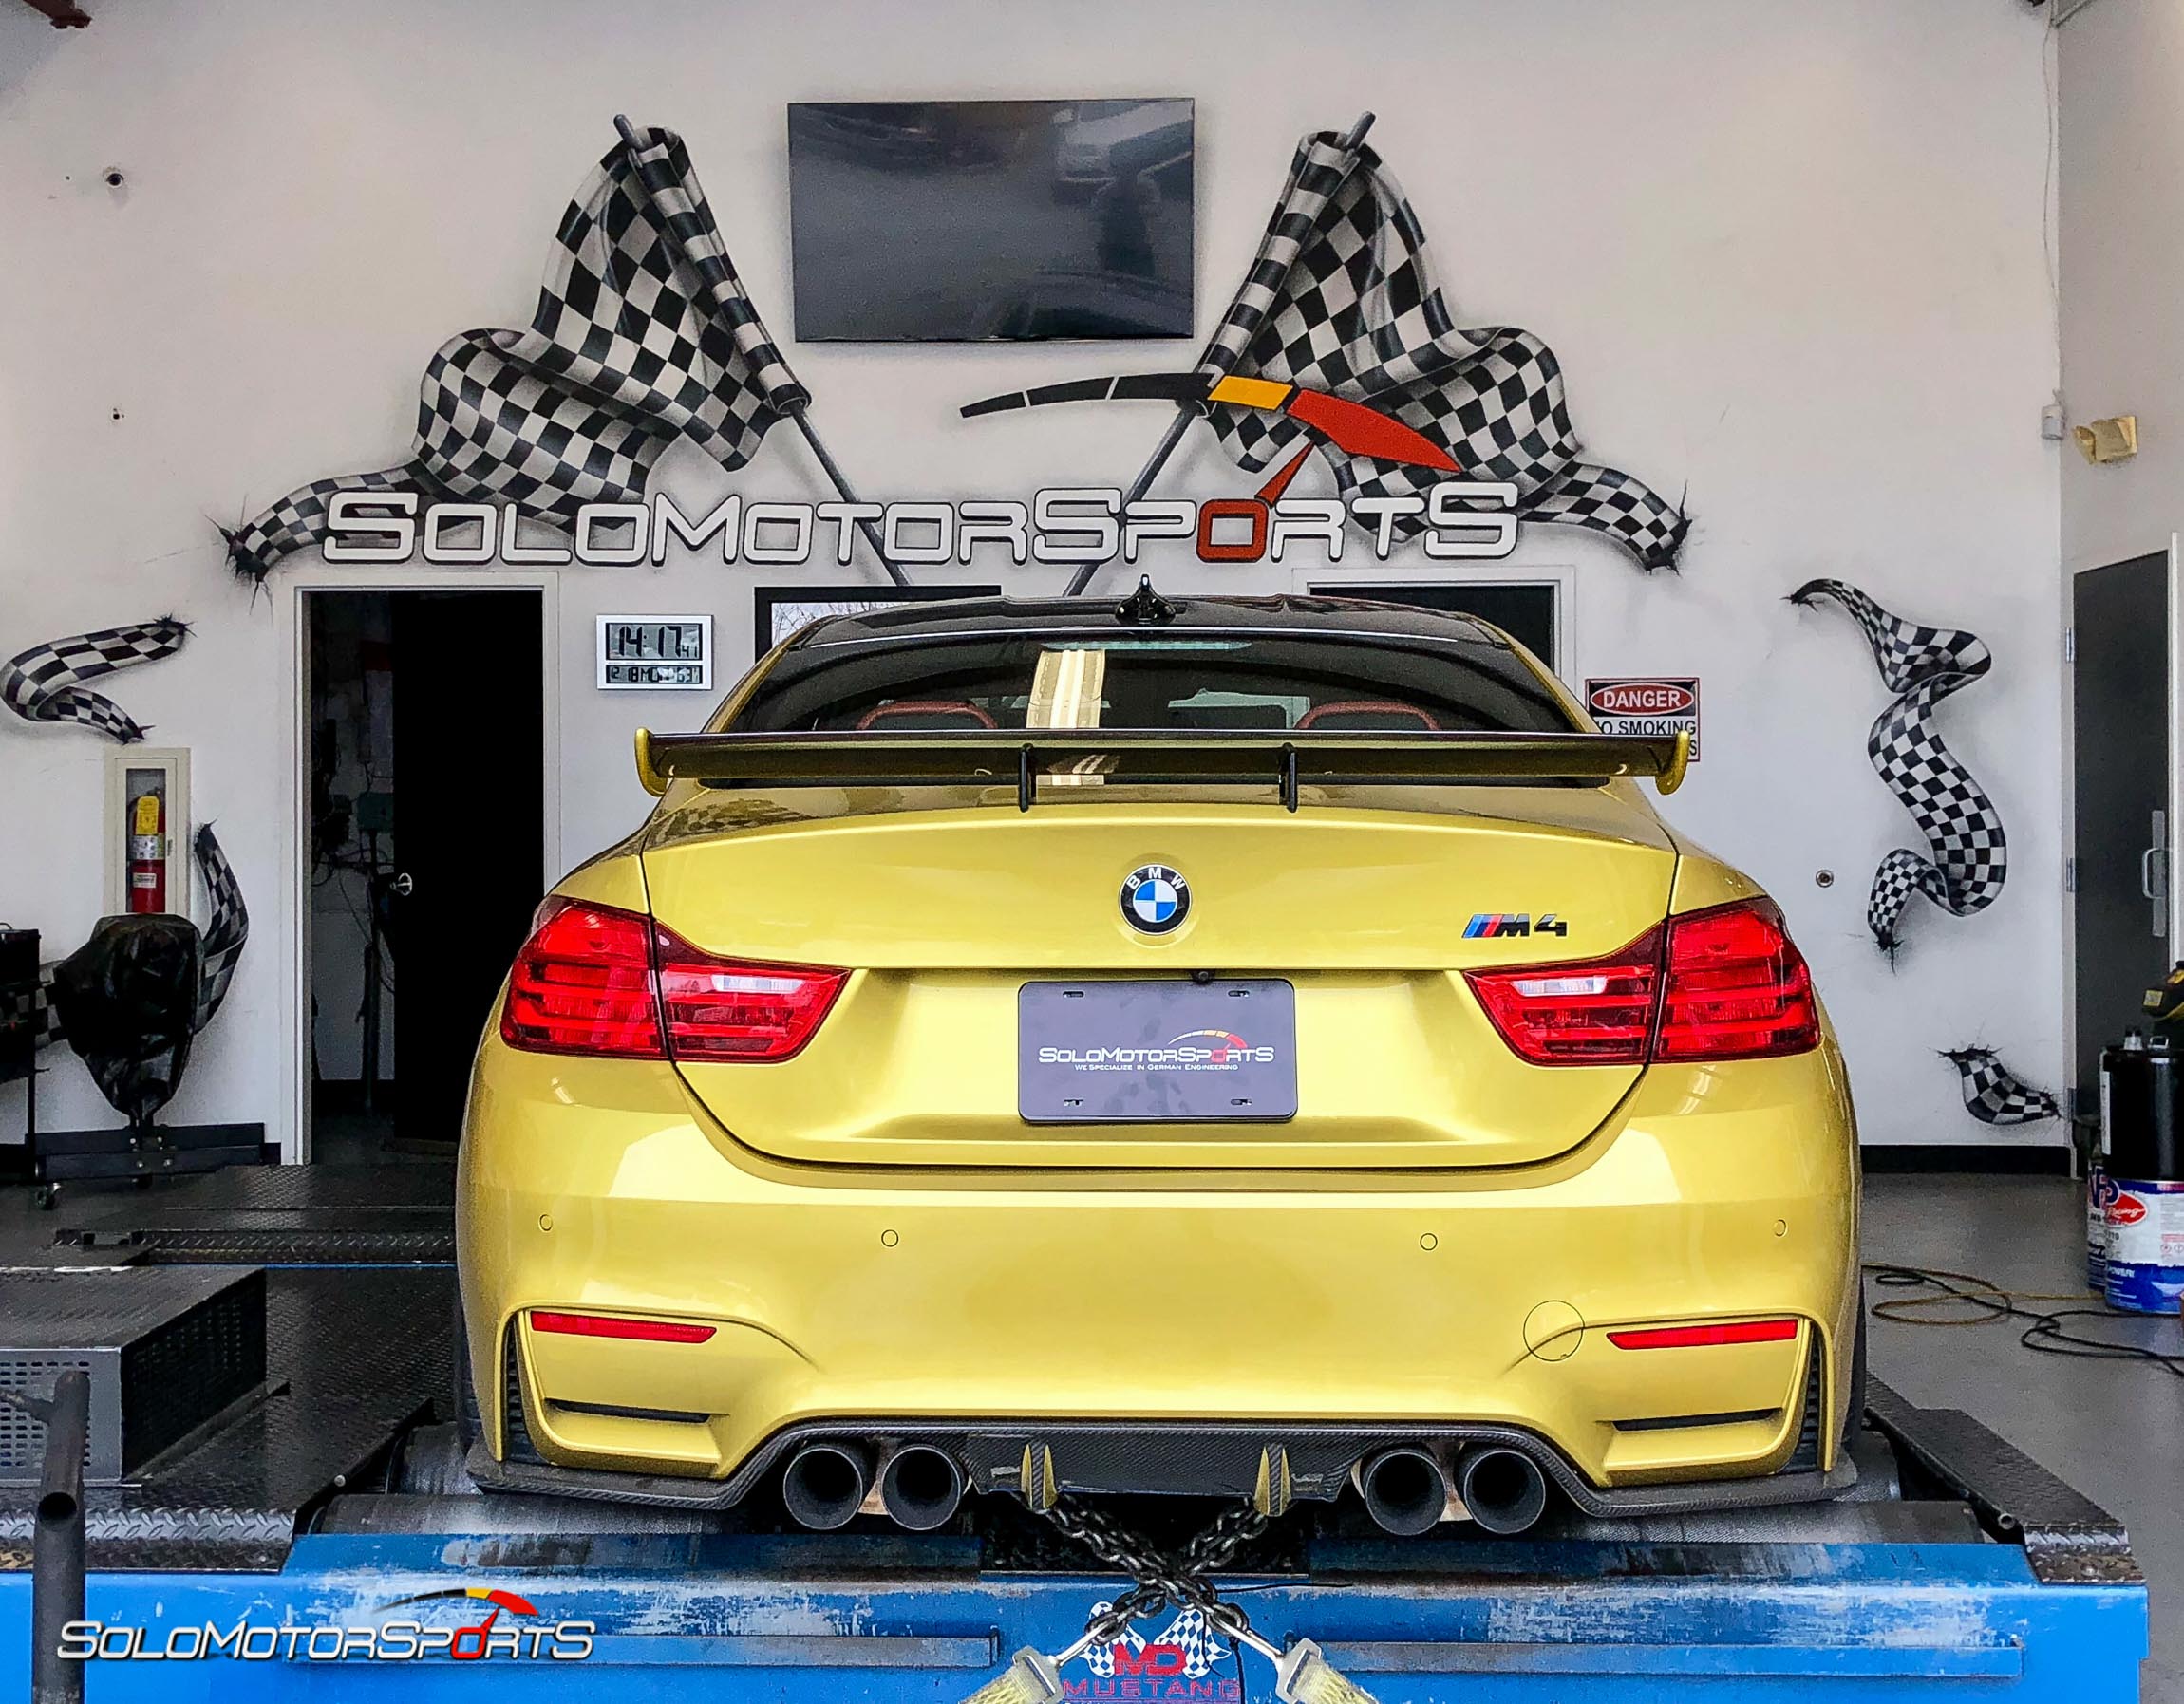 bmw m4 f82 in for power gains downpipes heat exchanger yellow bmw specialists solo motorsports custom tune sms dyno tune downpipes and csf intercooler